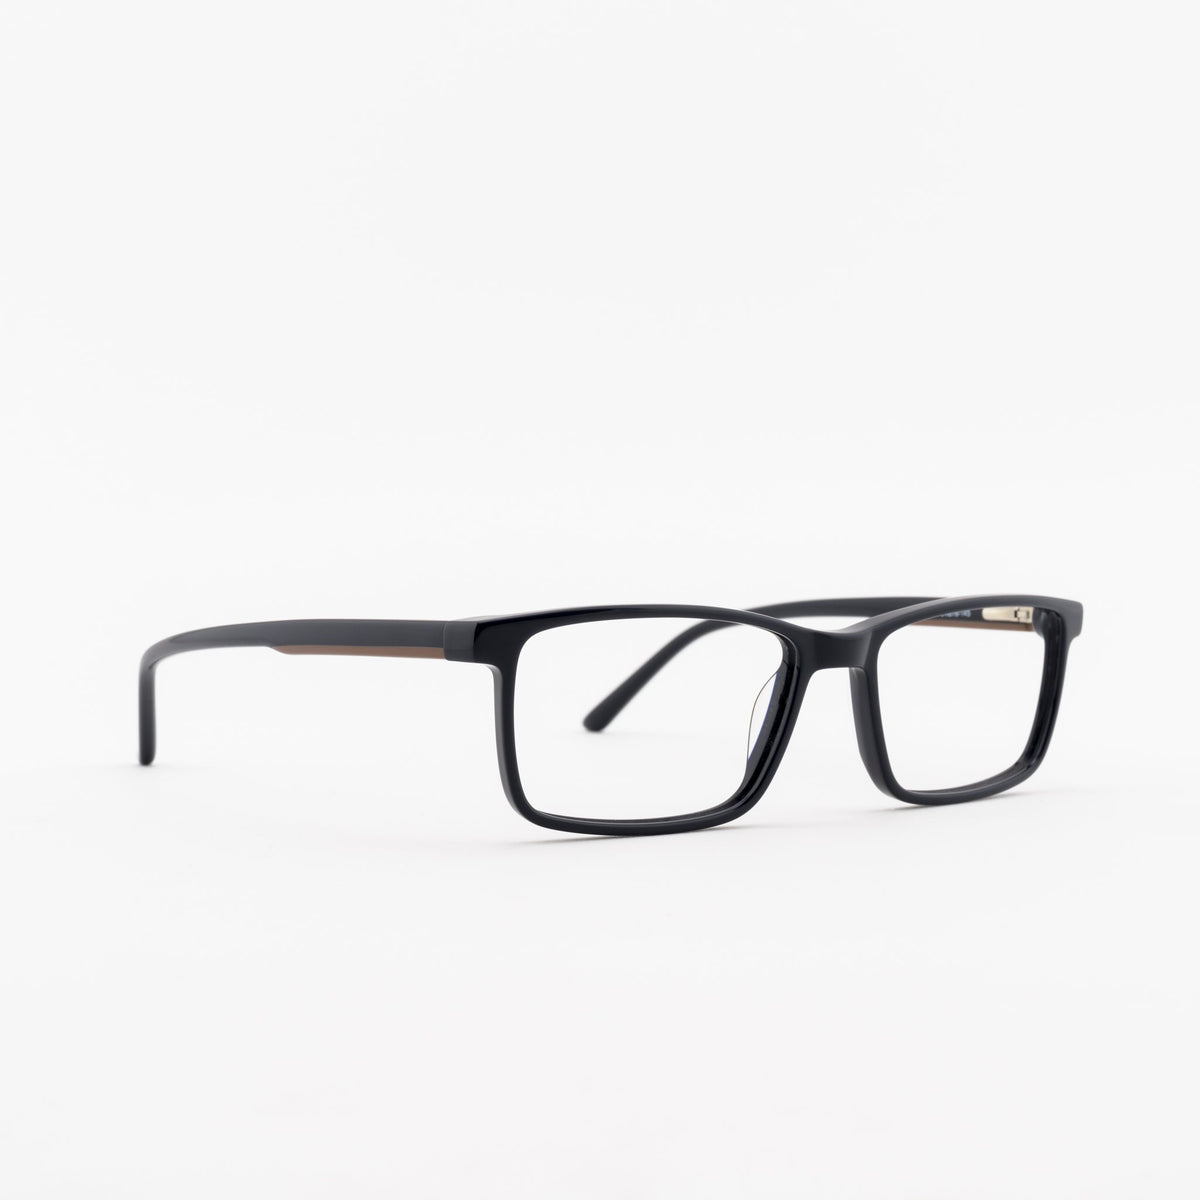 SF-541 Frames Superflex 54 S301 - NAVY BROWN Not Available